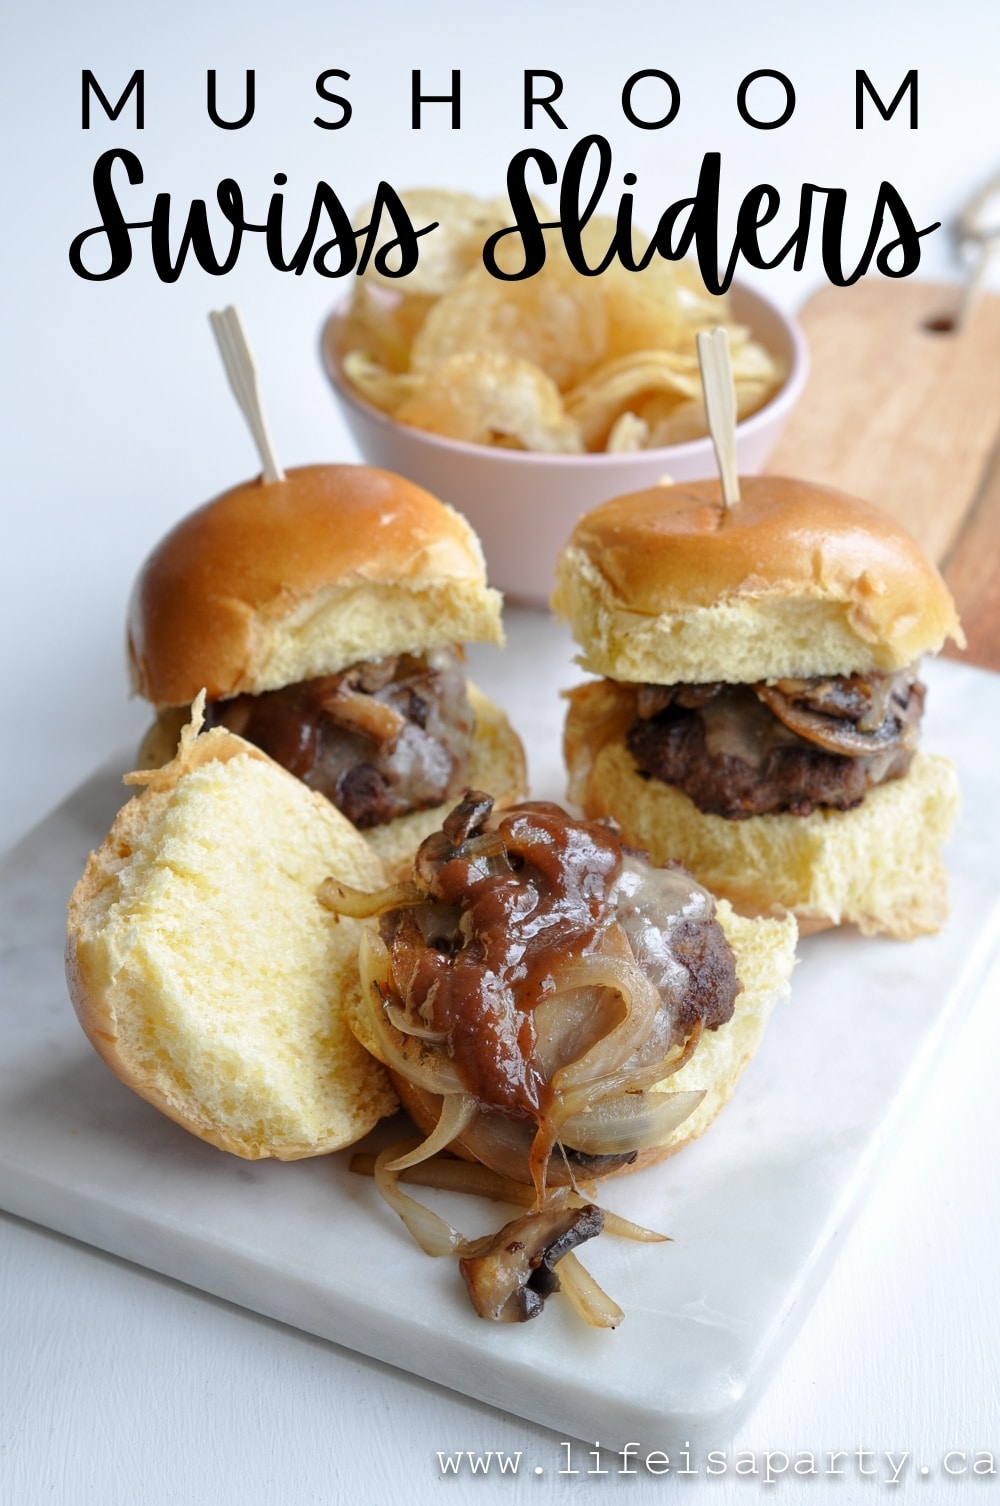 Mushroom Swiss Burger Recipe: these homemade sliders are easy to make and a real crowd pleaser, the perfect combination.